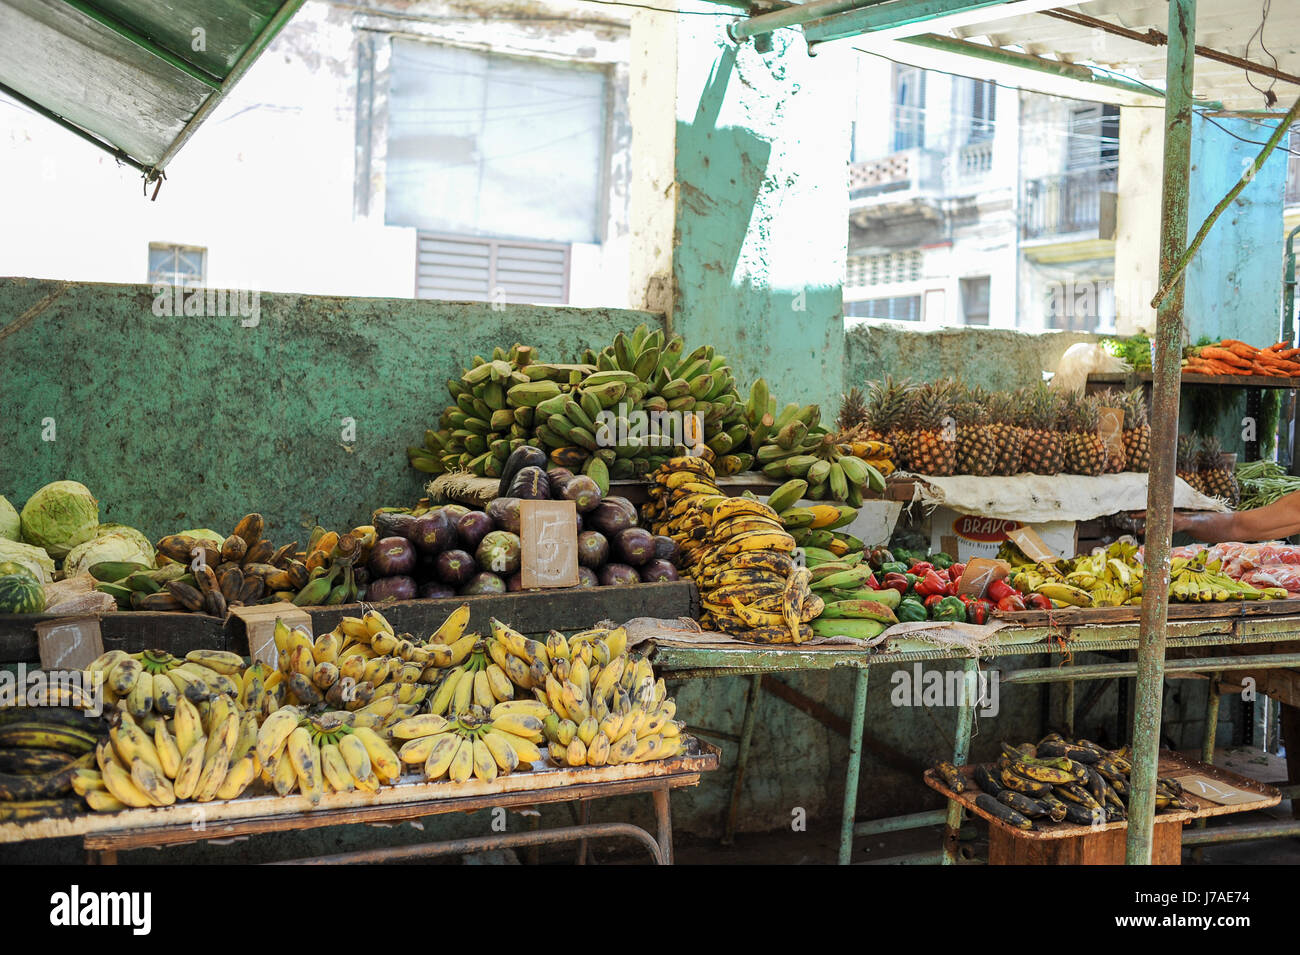 Fruit and vegetables stand at a local market in Neptuno street, Havana, Cuba Stock Photo